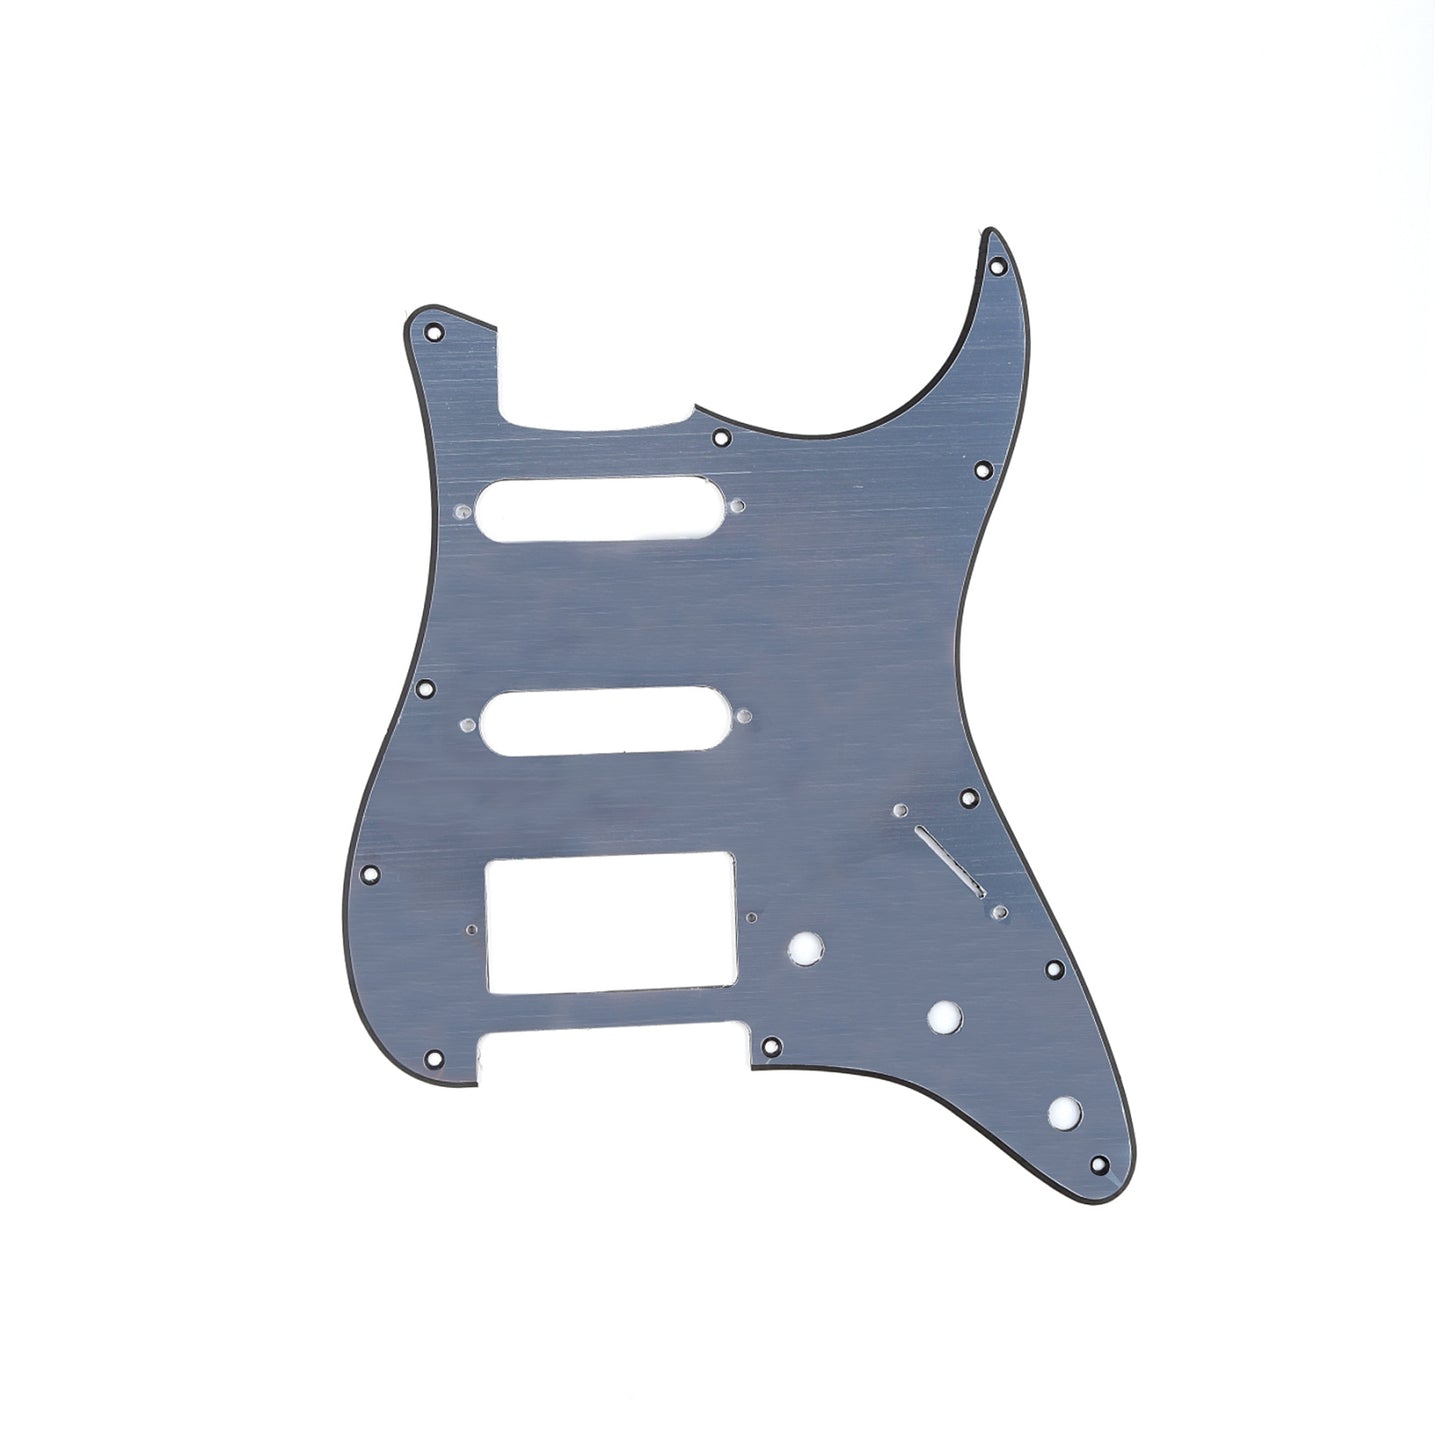 Musiclily HSS 11 Hole Guitar Strat Pickguard for Fender USA/Mexican Made Standard Stratocaster Modern Style,  2Ply Aluminum Surface